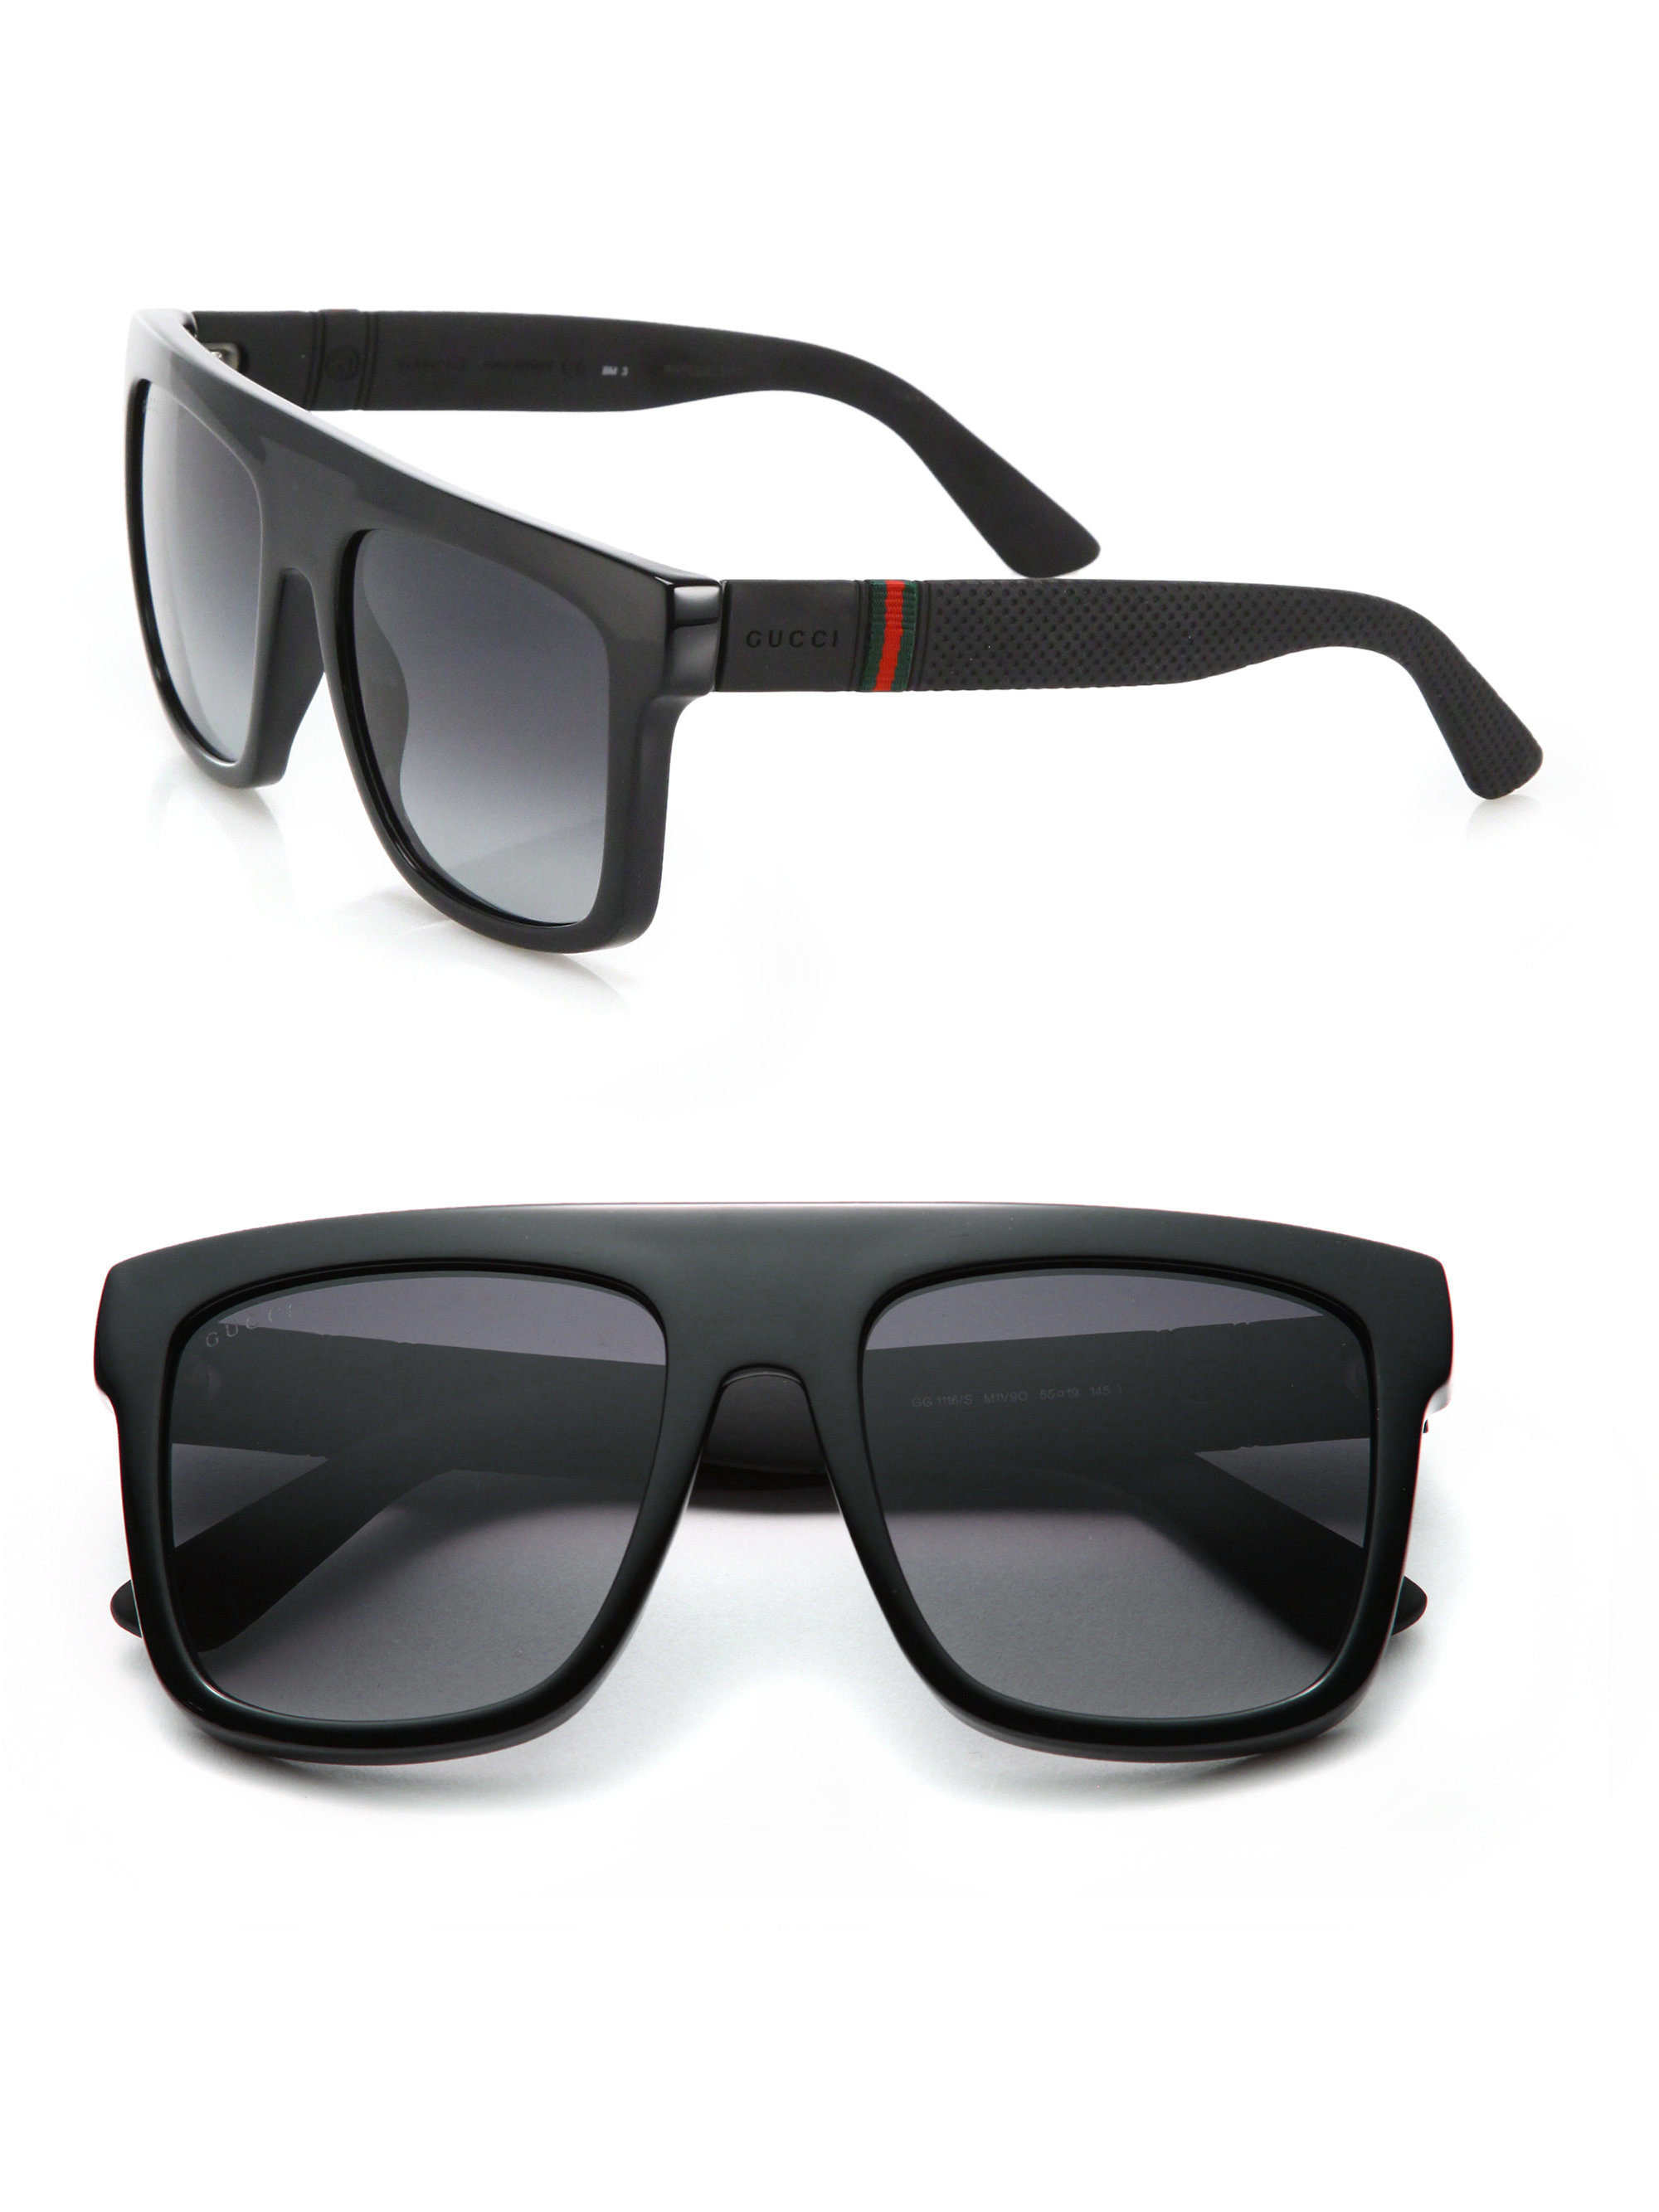 Gucci Black 55mm Flat Top Injected Sunglasses Product 0 887180494 Normal 